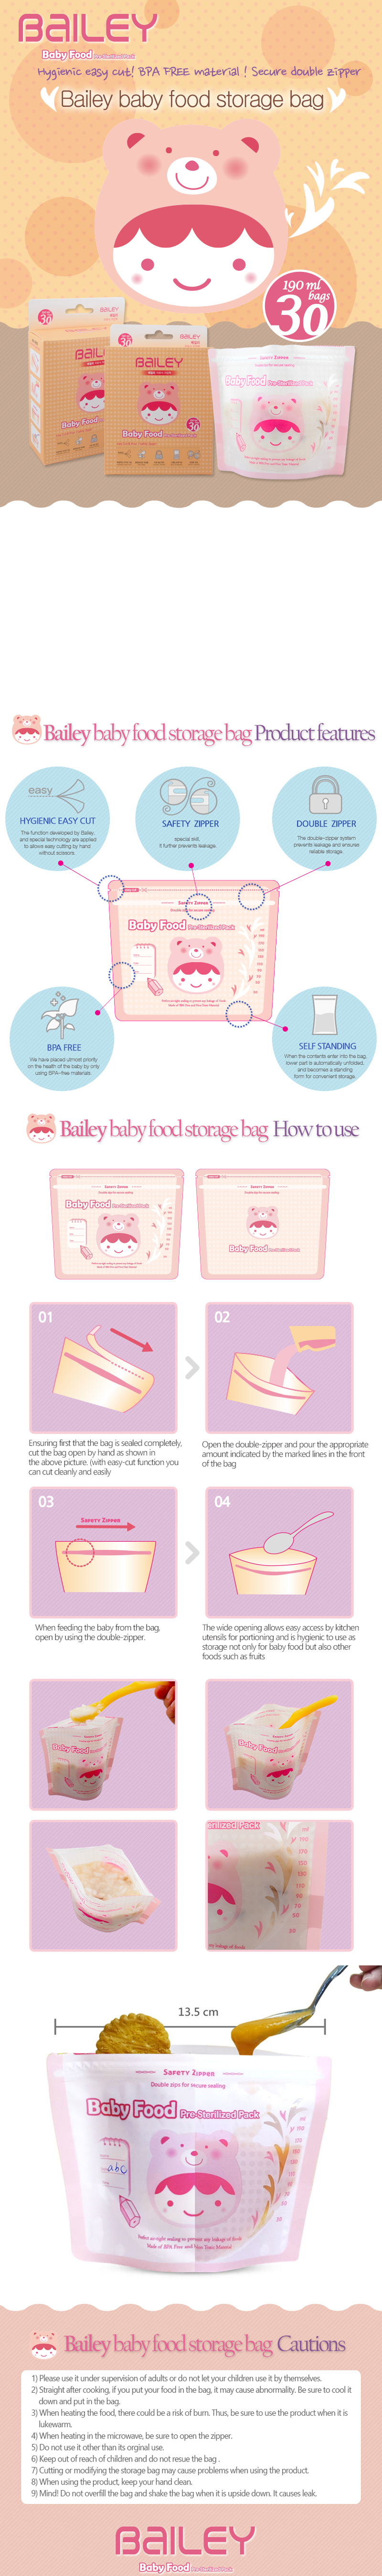 Bailey Disposable Pre-Sterilized Baby Food Bags